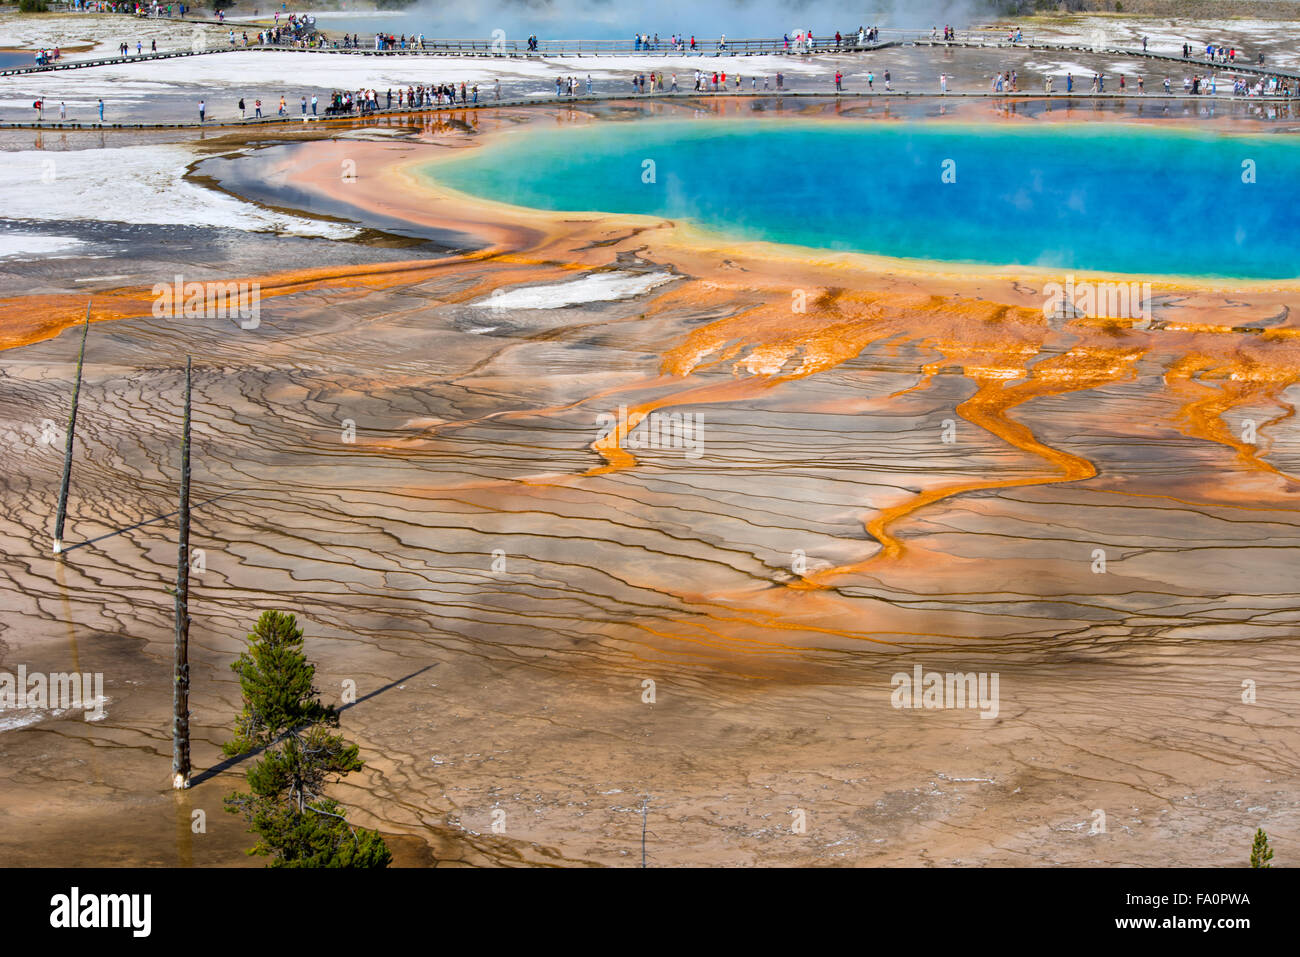 Grand Prismatic Spring, le Parc National de Yellowstone, Wyoming Banque D'Images